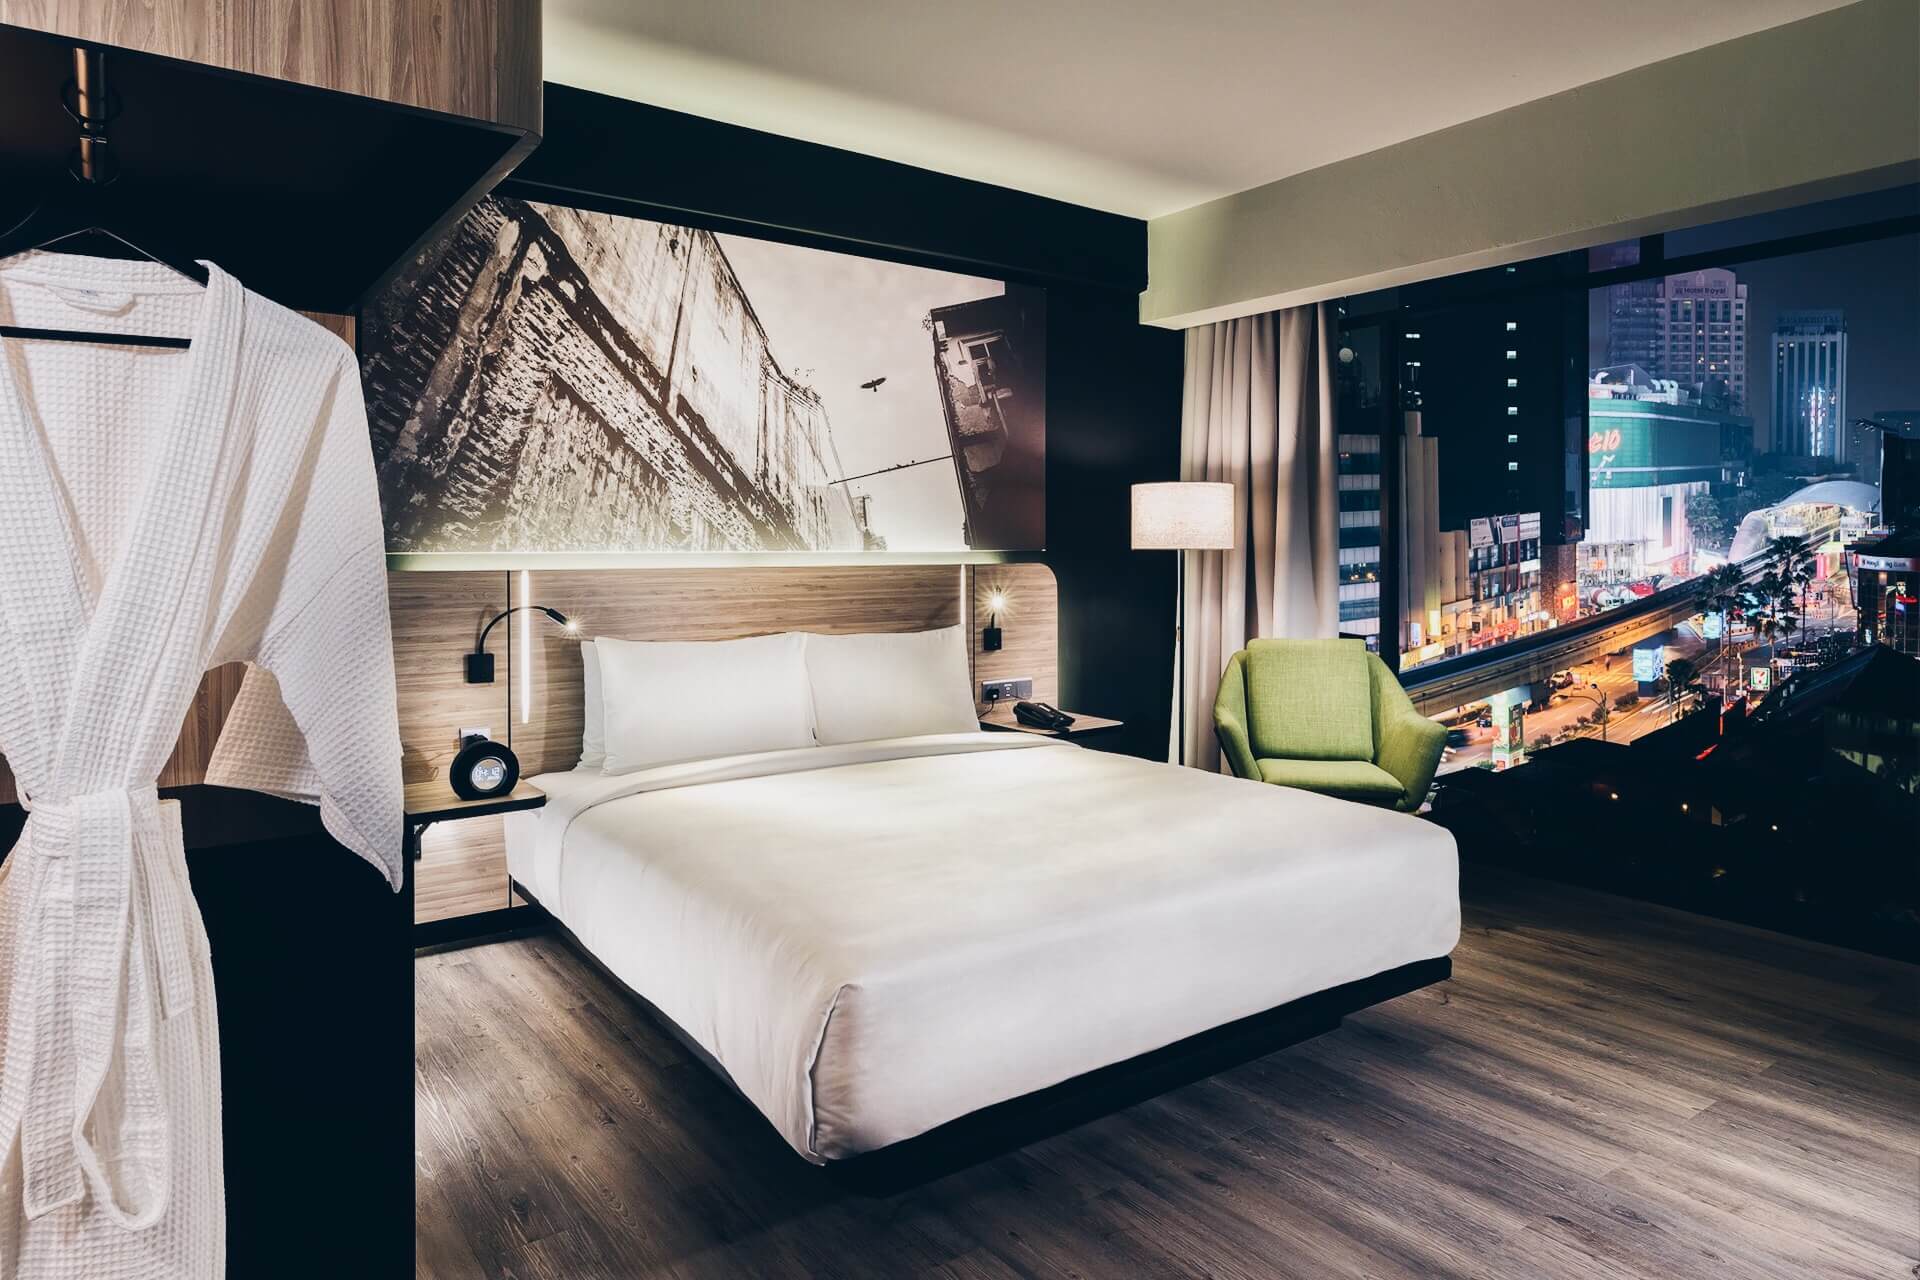 Deluxe King room with Bukit Bintang city views at KL Journal Hotel